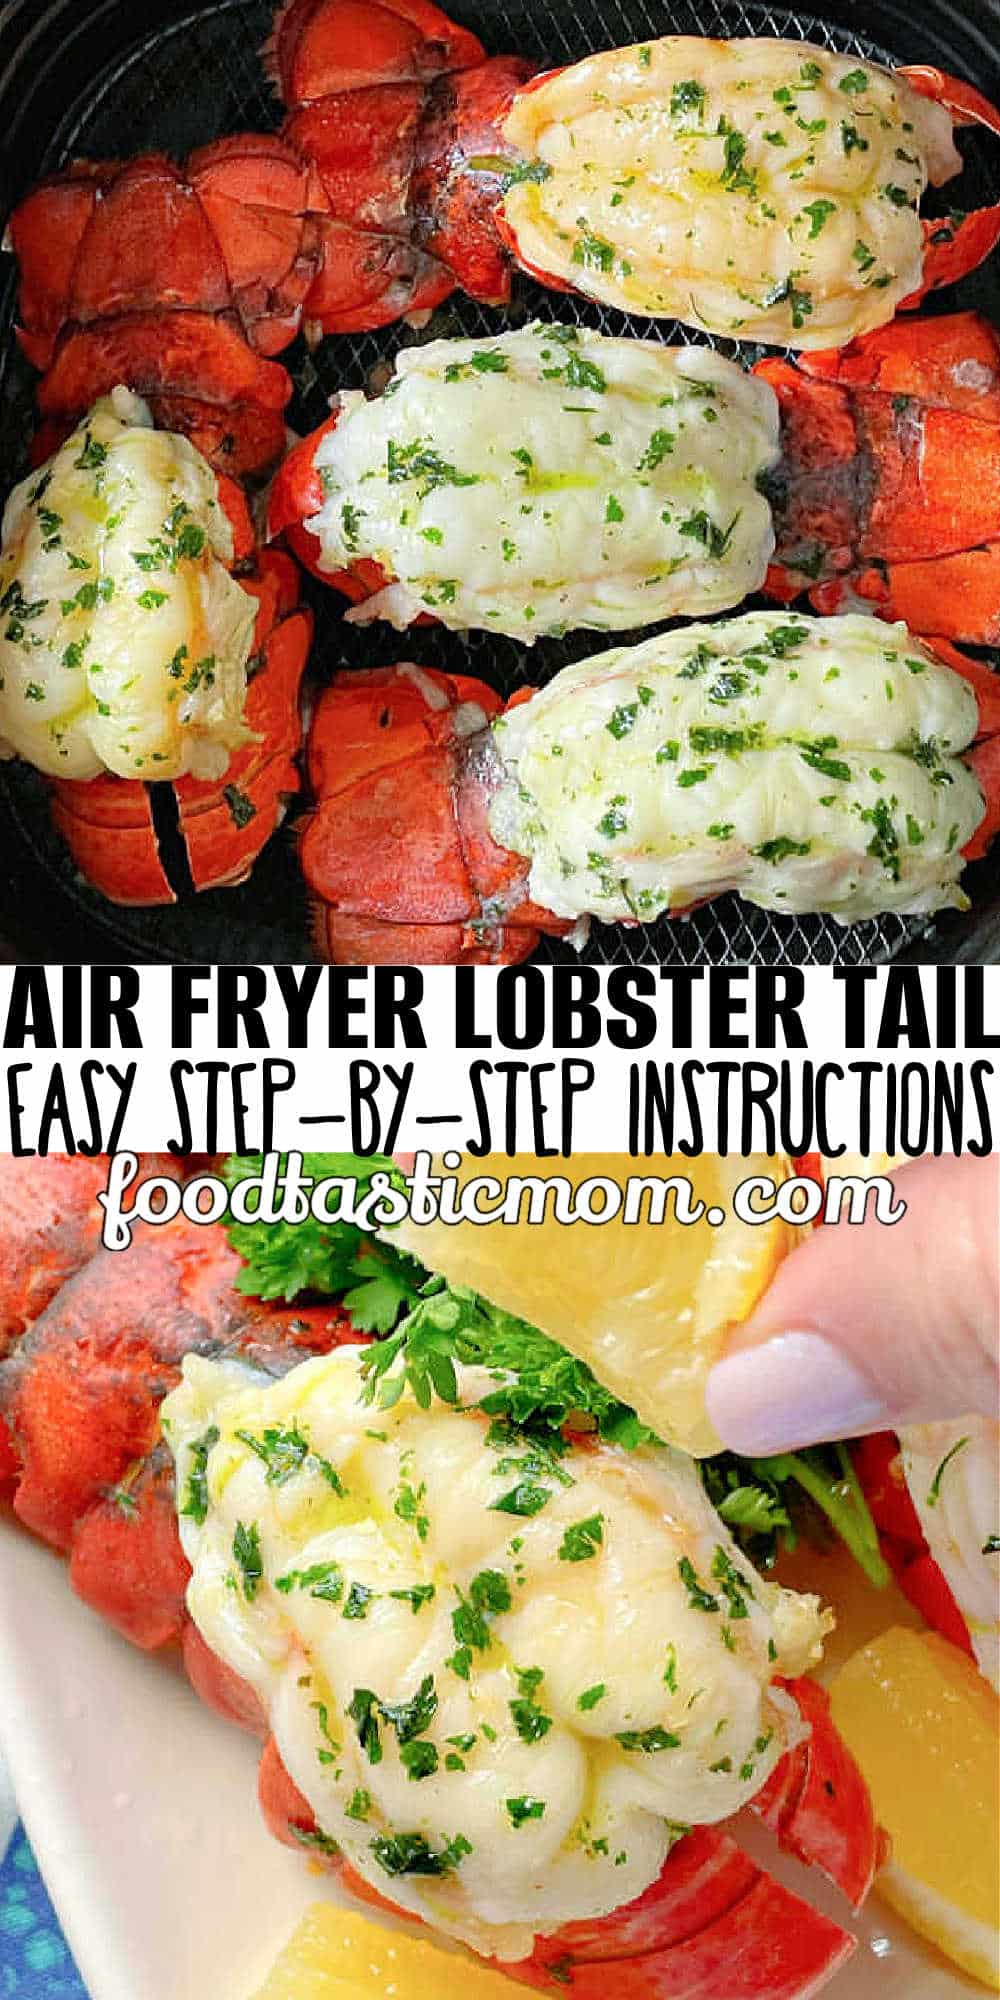 Air Fryer Lobster Tail | Foodtastic Mom #airfryerrecipes #lobstertails #howtocooklobstertail #howtobutterflylobstertail #airfryerlobstertail via @foodtasticmom